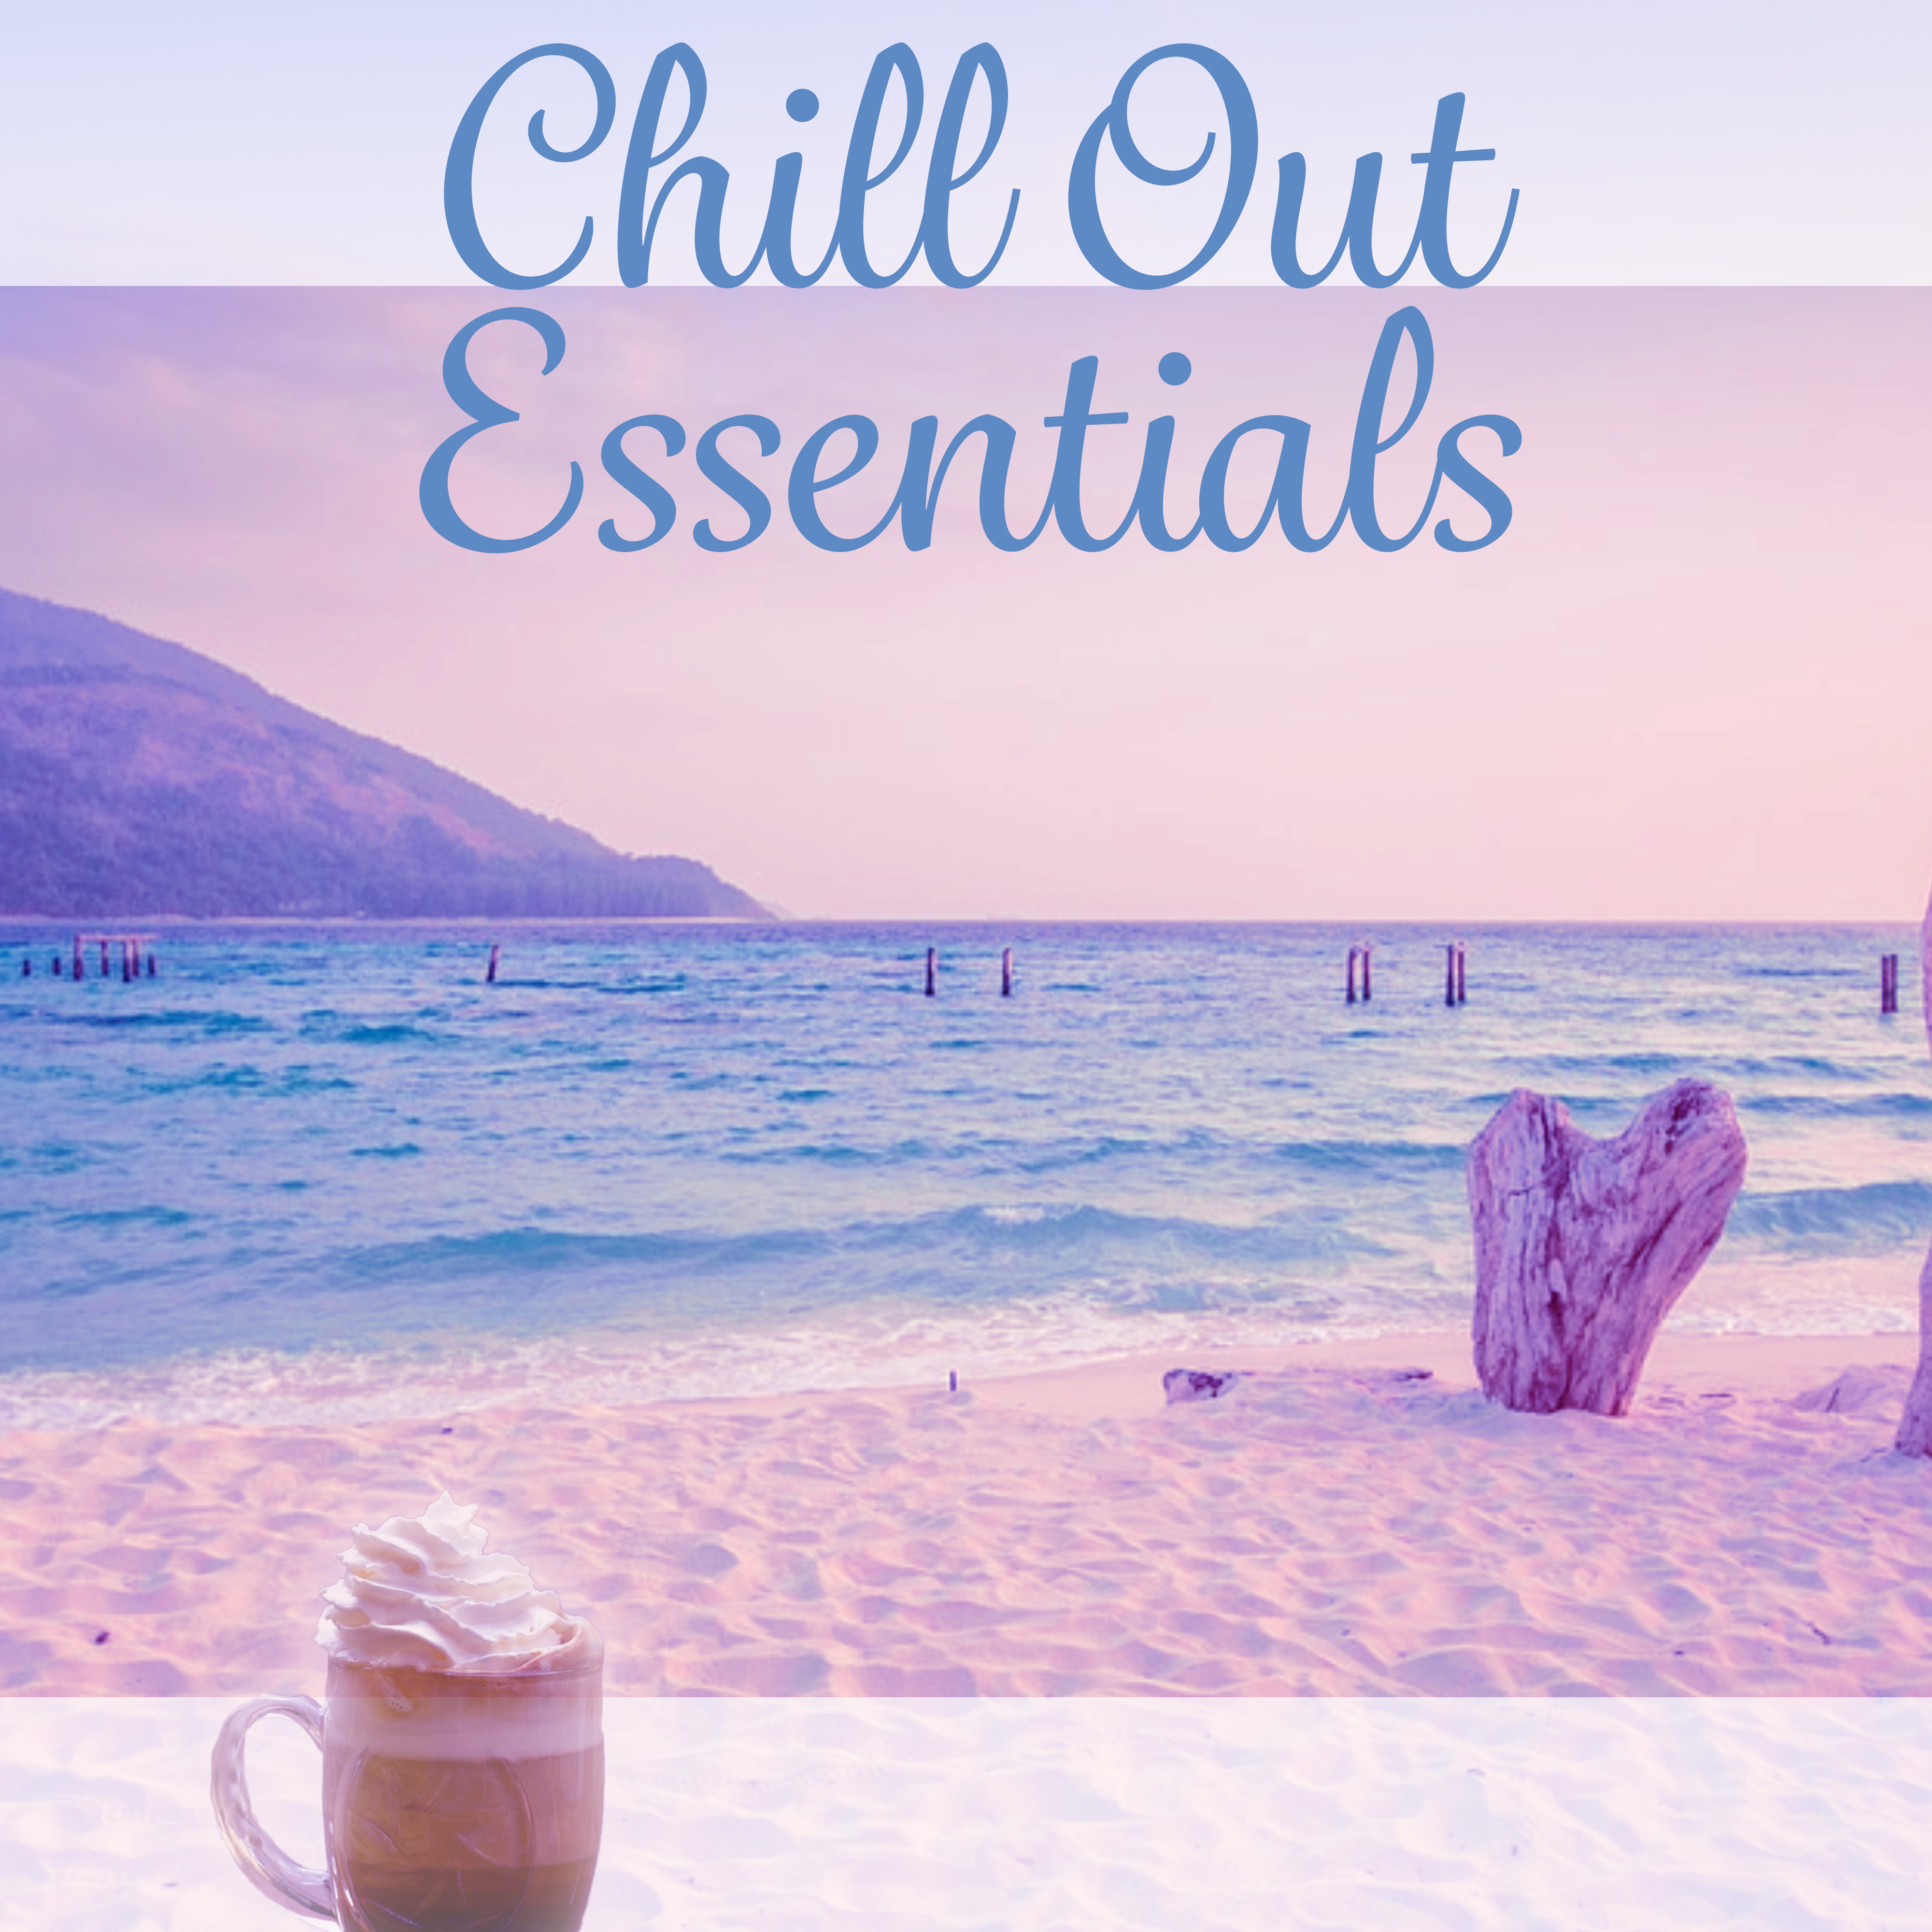 Chill Out Essentials – Beach Music, Deep Vibes of Chill Out Music, Sexy Music, Dance Party, Risin, Mellow Chillou, Deep Vibe, Chillout Lounge Ambient